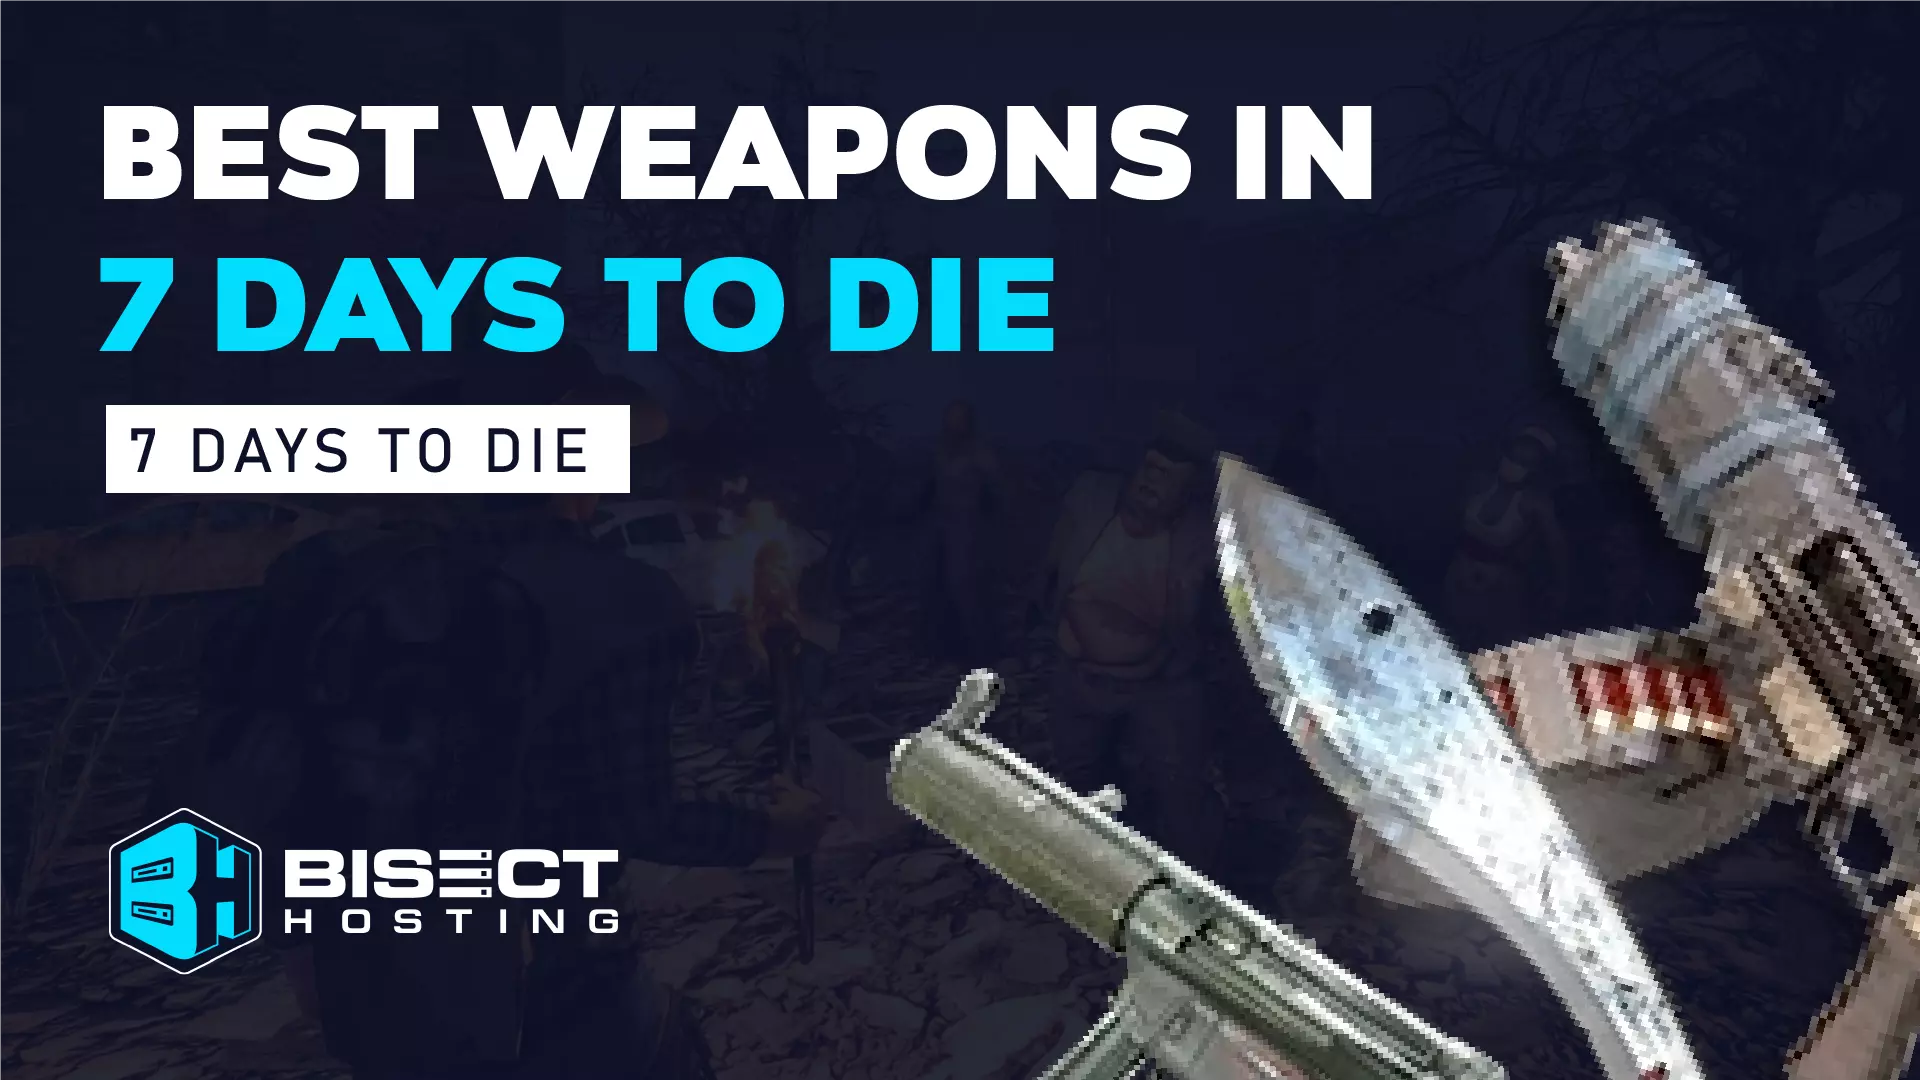 Ranking the Best Weapons in 7 Days to Die